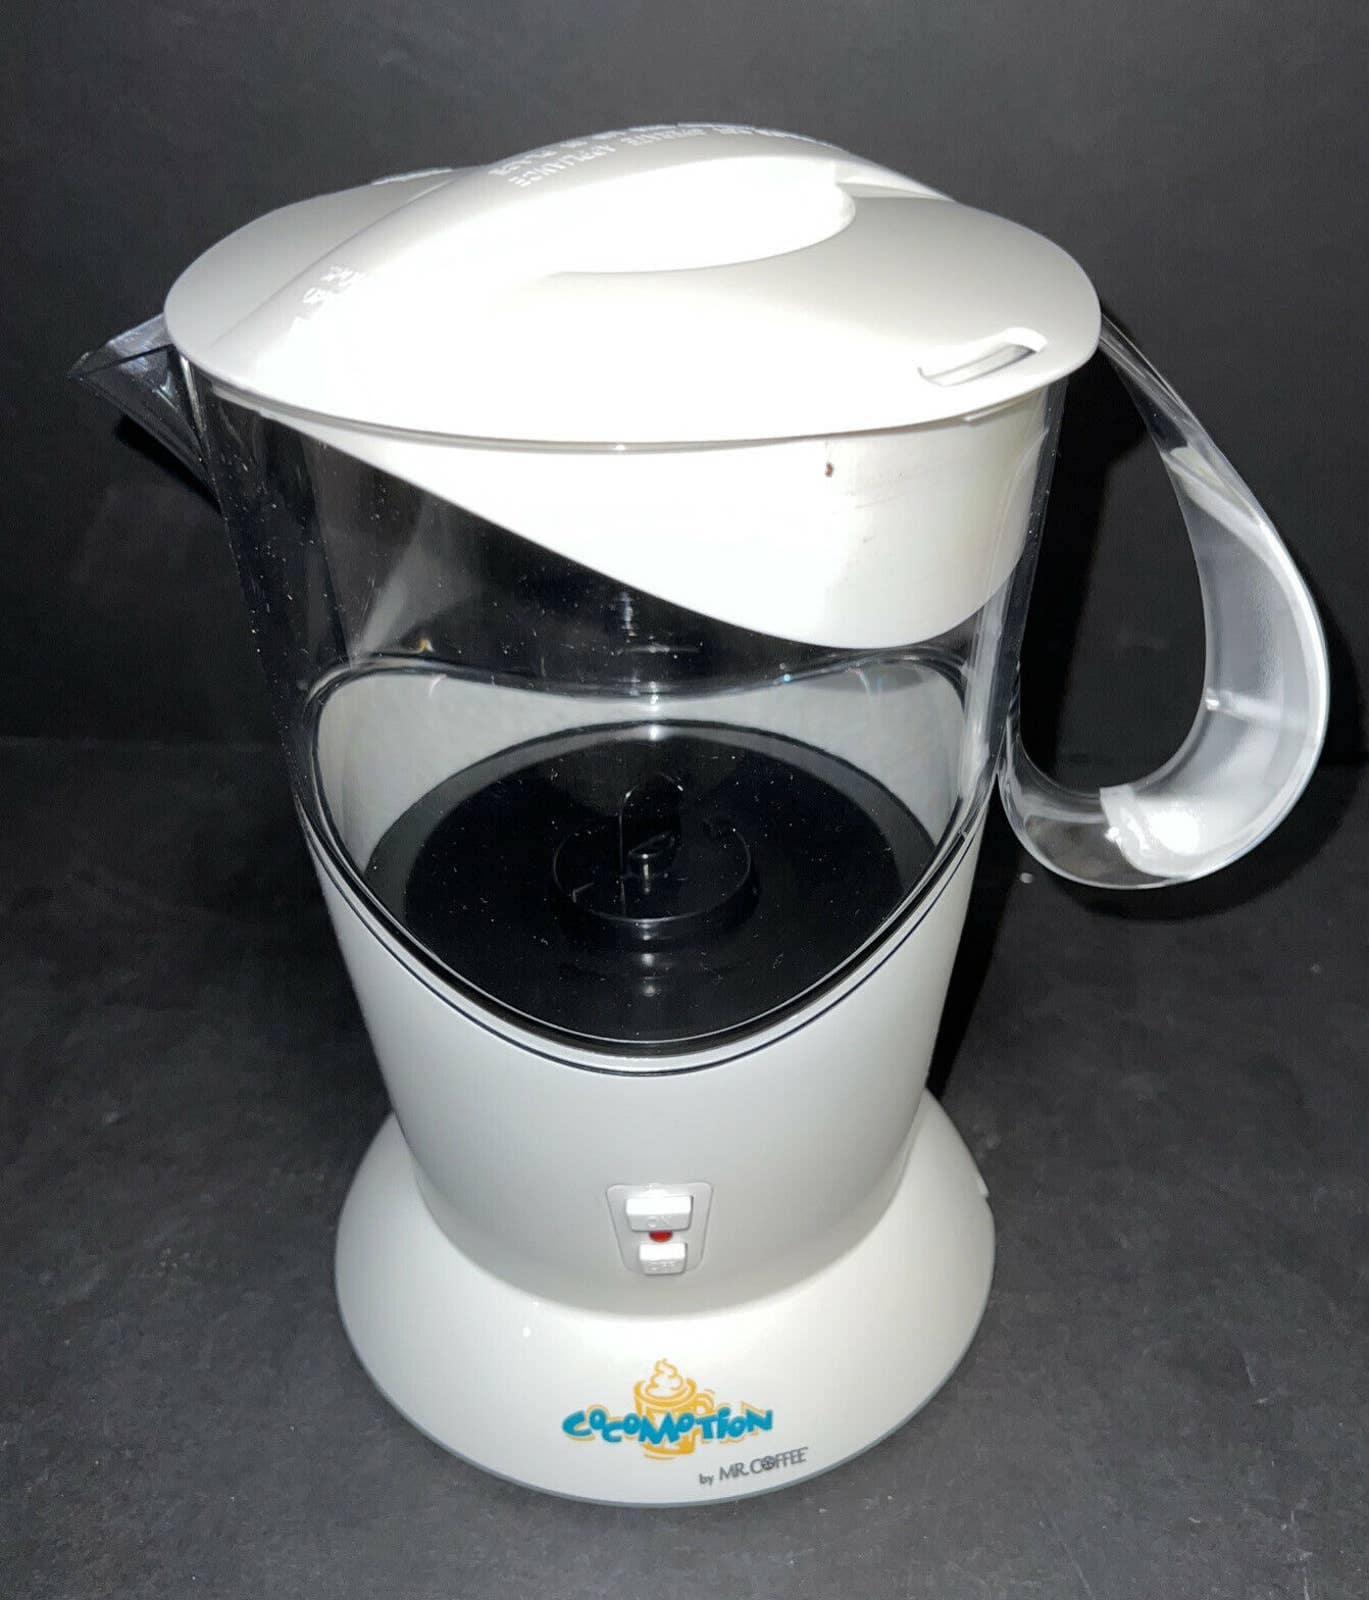 Mr. Coffee Cocomotion Automatic Hot Chocolate Maker 